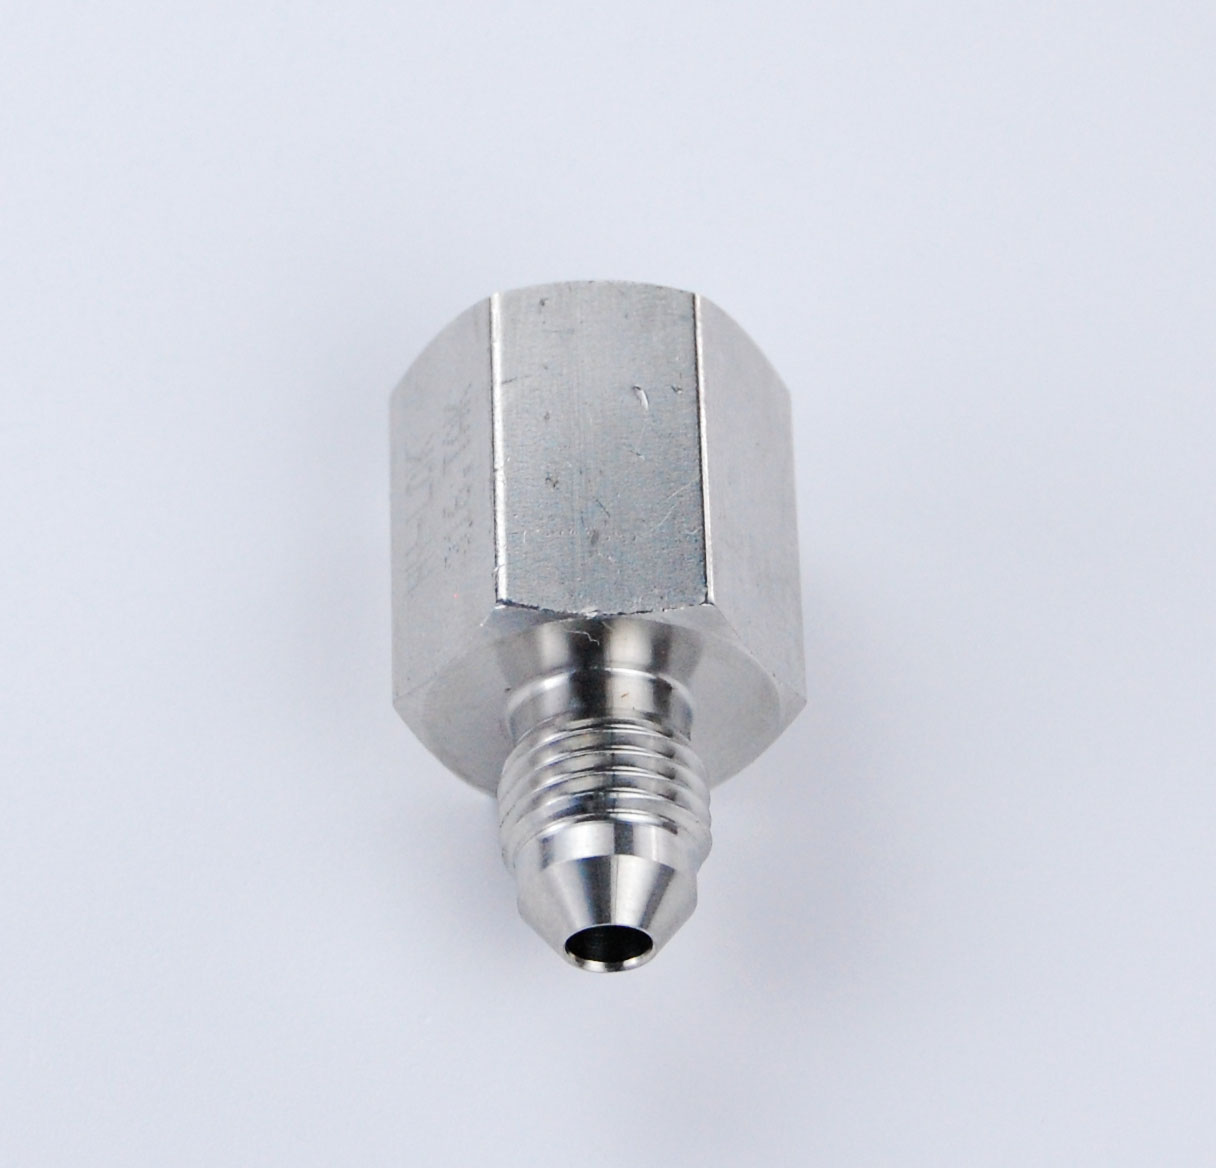 Adapter, #4 JIC Male to 1/4 NPT Female, Stainless Steel #67190SS